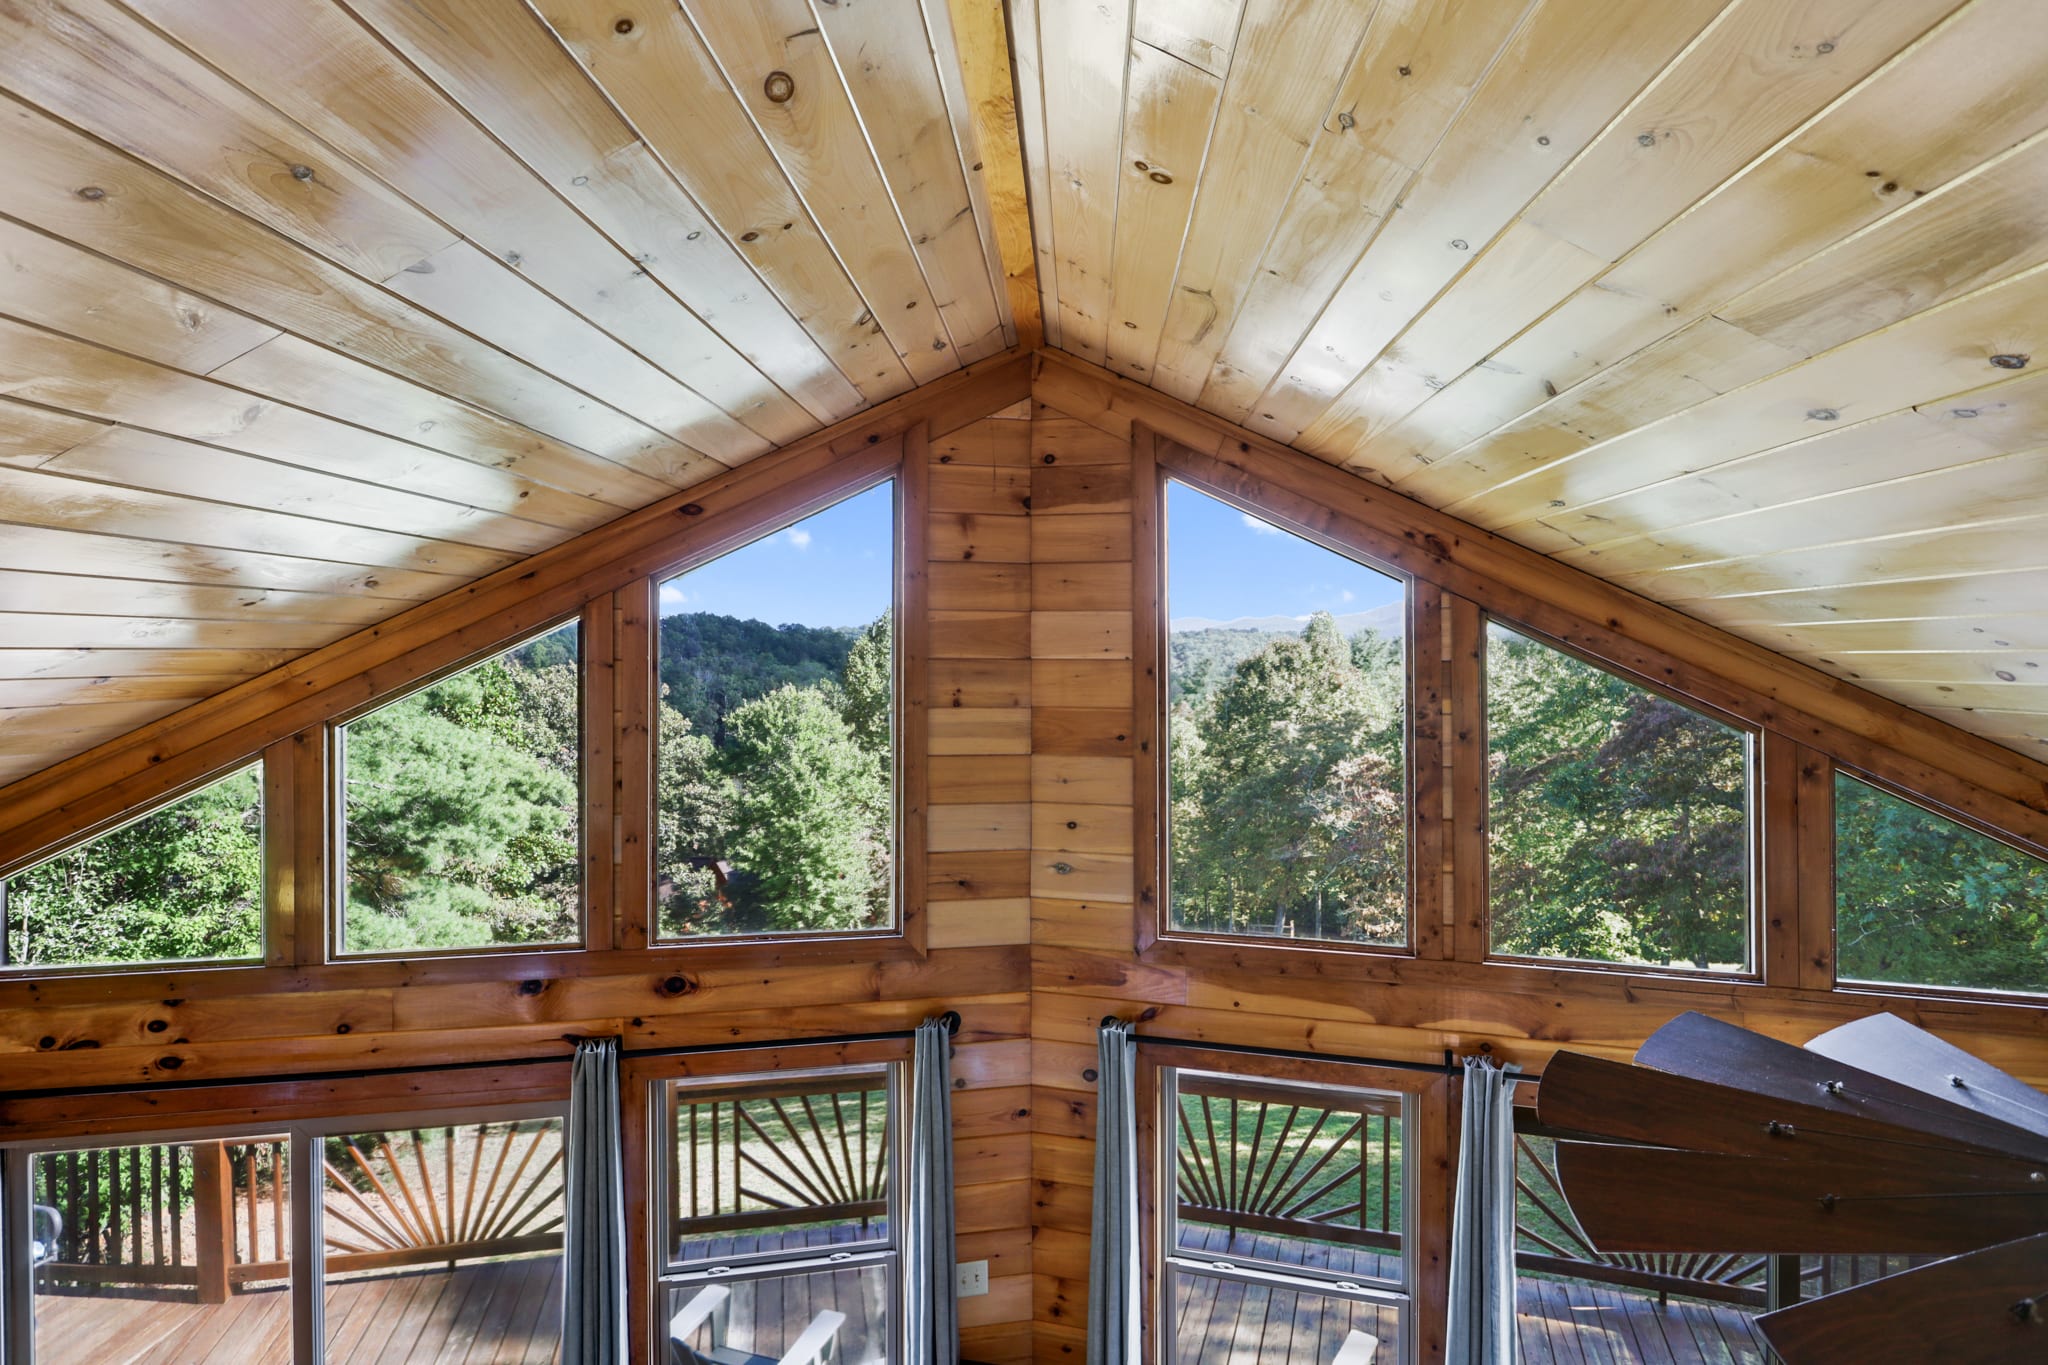 High Ceilings, tons of natural light throughout the cabin